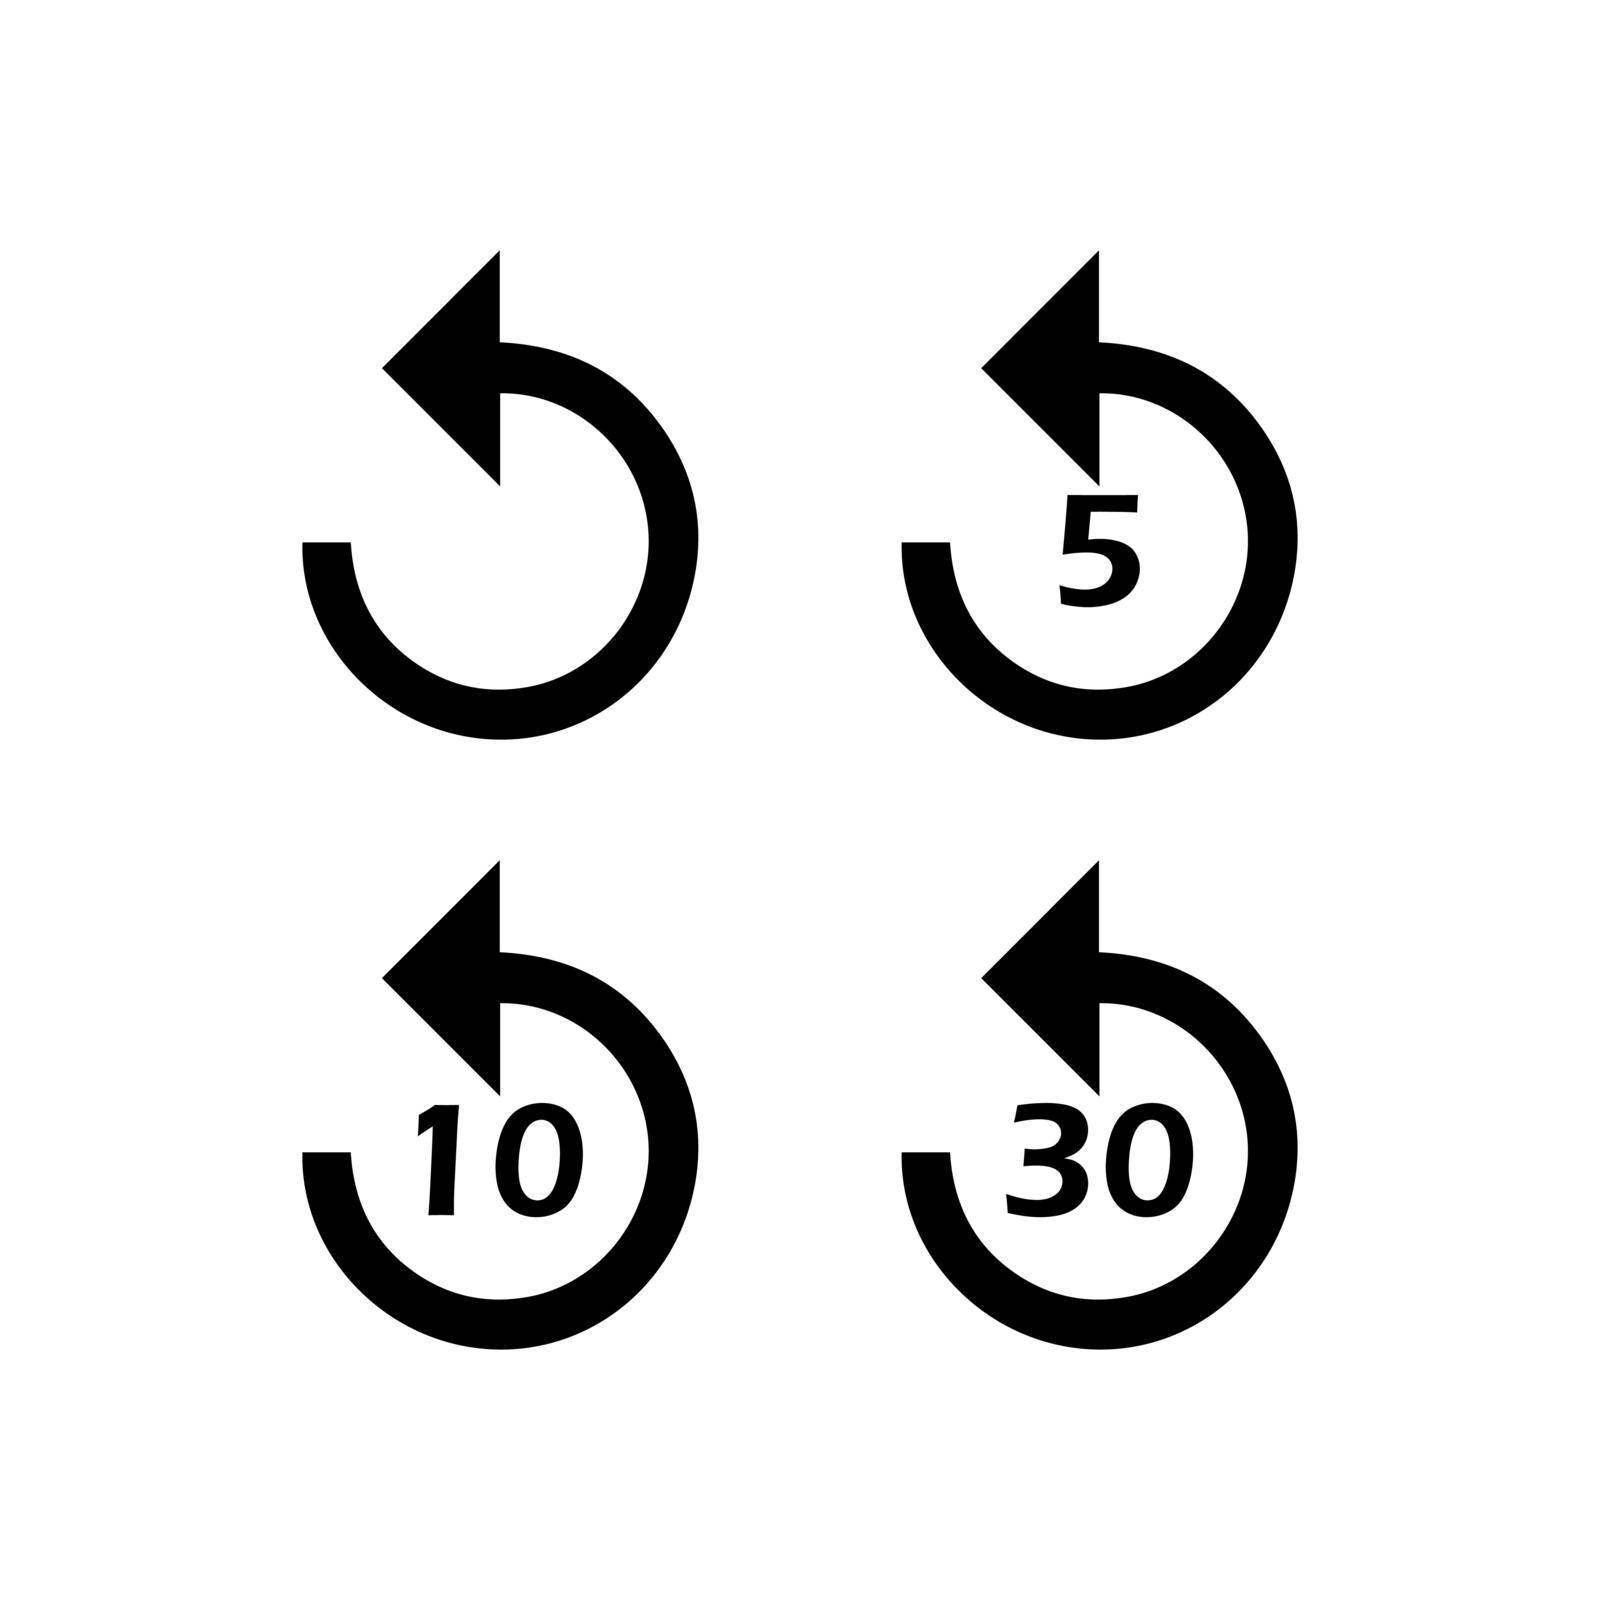 Return icon or rewind to 5, 10 and 30 sec. Return icon set Vector EPS10